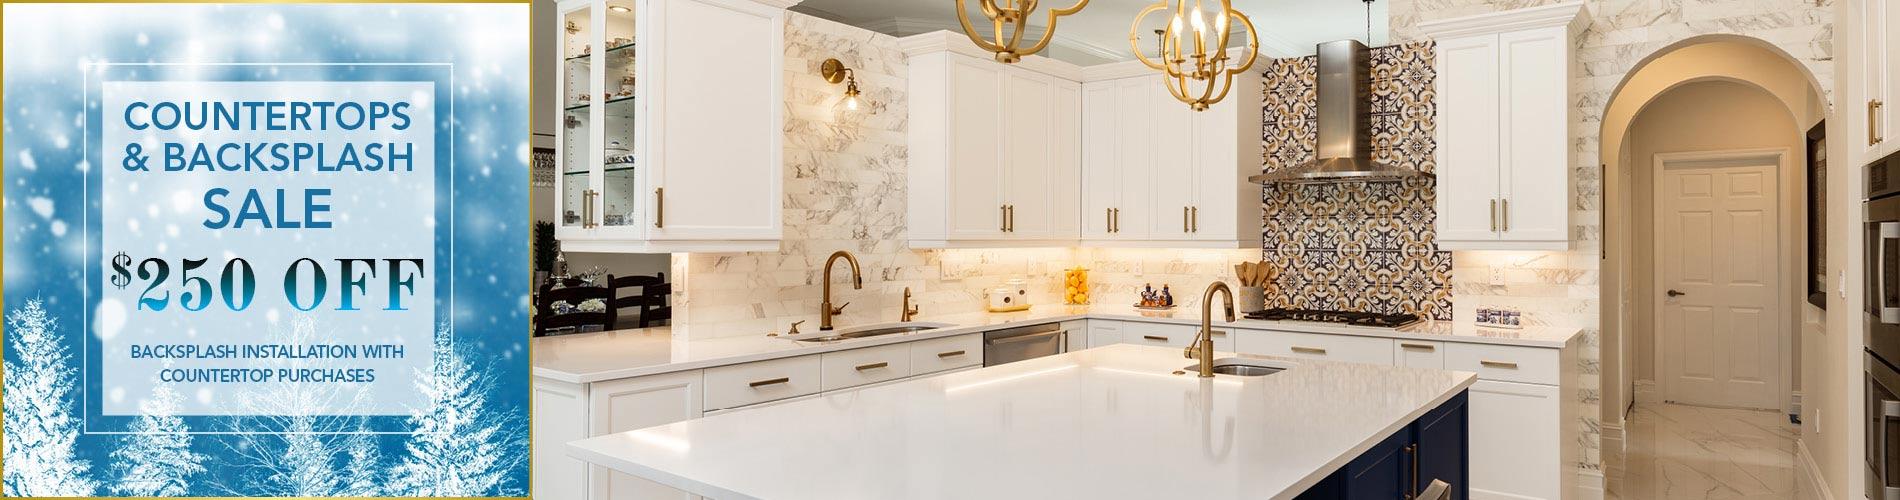 $250 off backsplash installation with countertop purchase